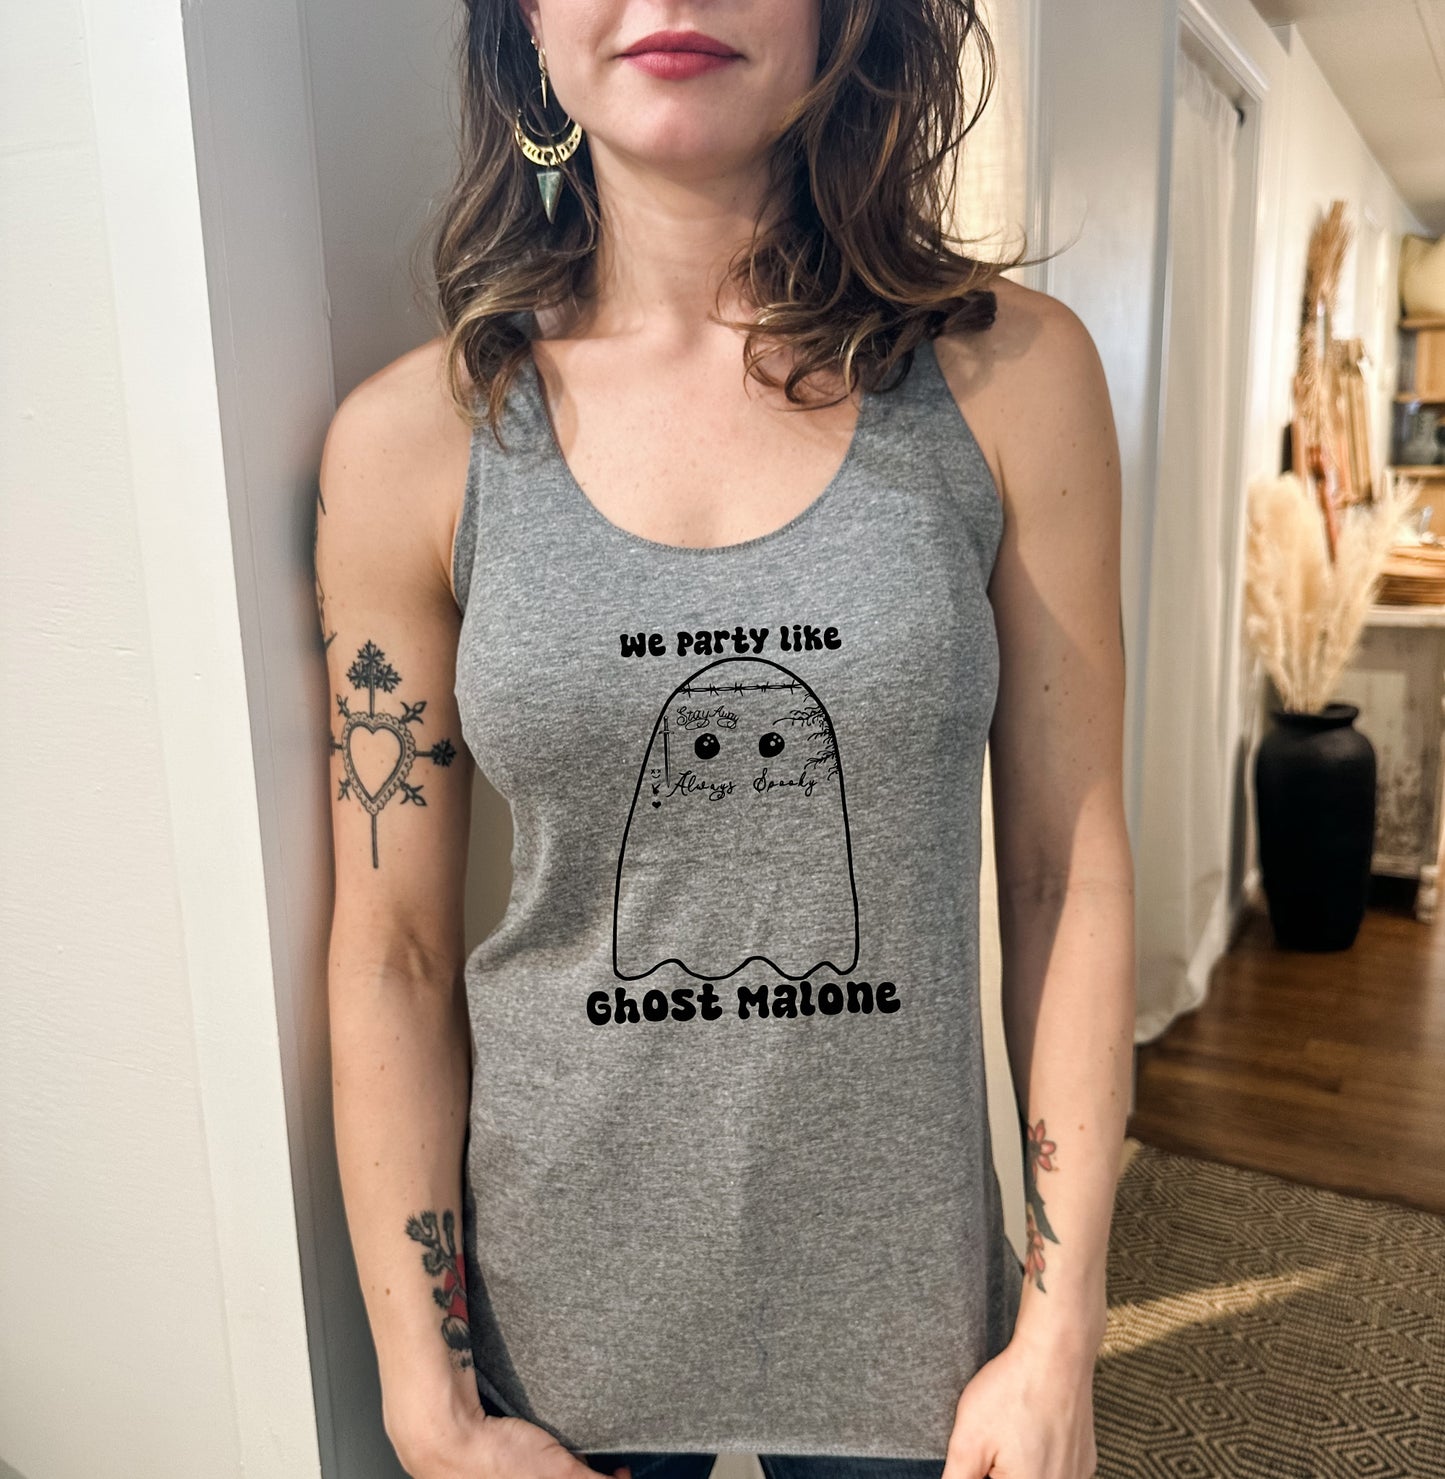 a woman wearing a grey tank top with a polar bear on it